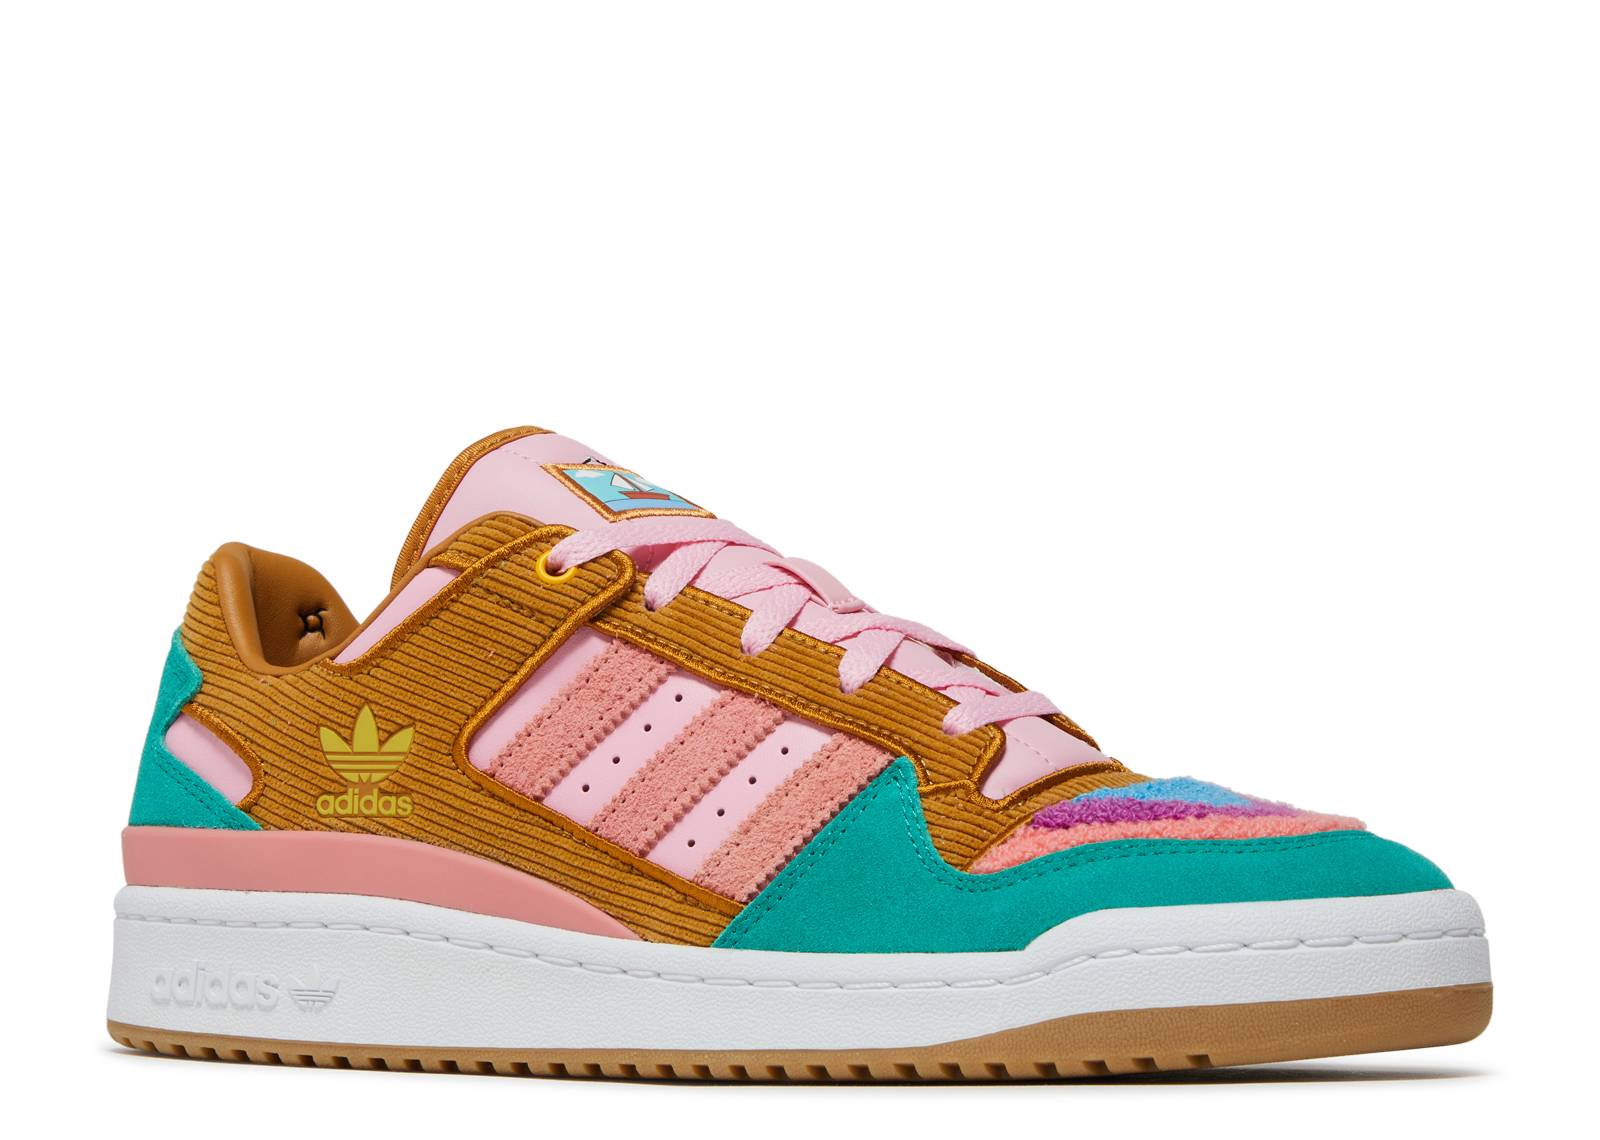 THE SIMPSONS X FORUM LOW 'LIVING ROOM'